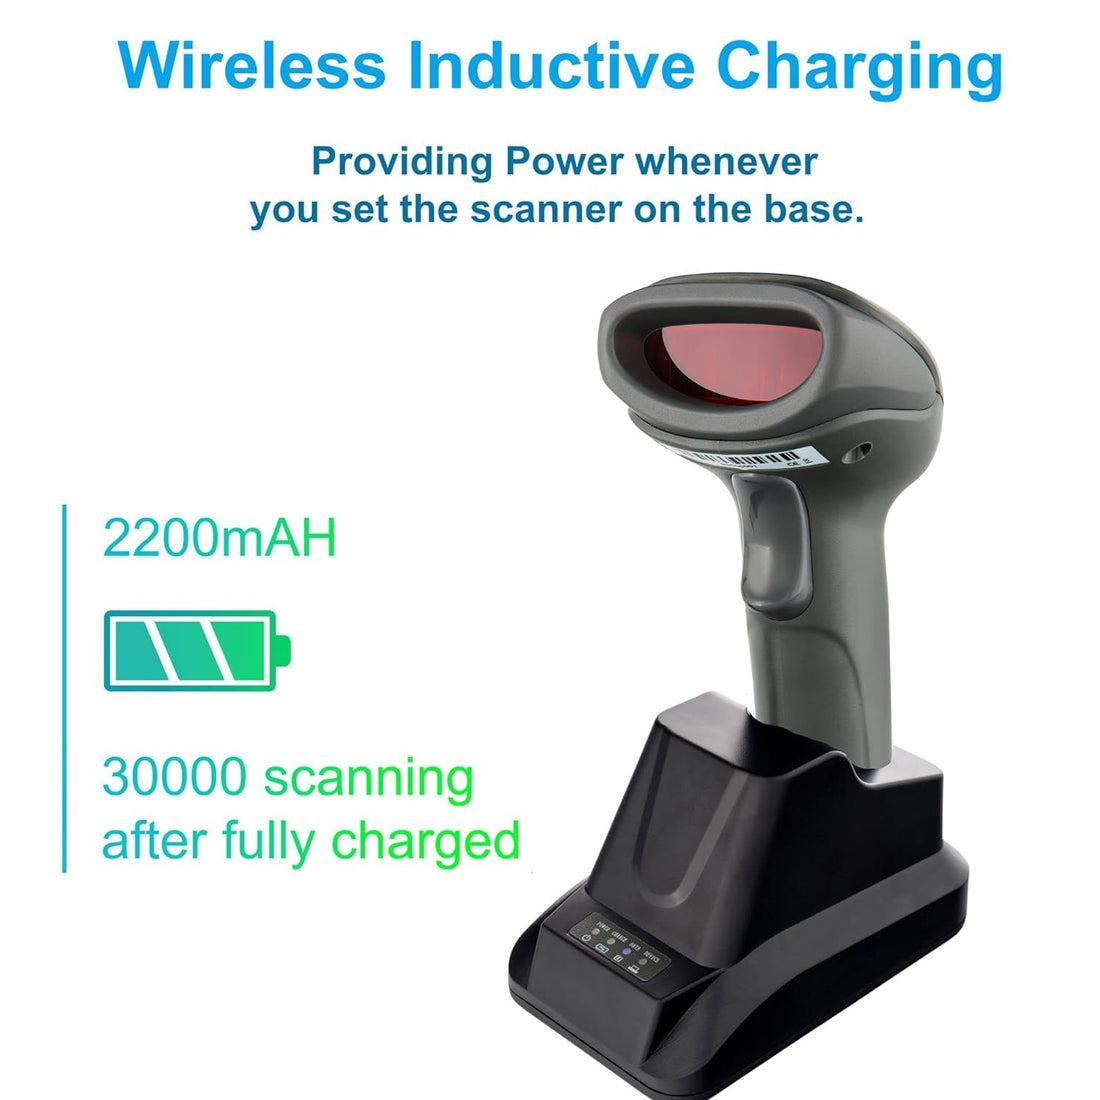 LS-PRO Wireless Barcode Scanner with USB Cradle Receiver Charging Base, 2.4GHz Handheld 1D Cordless Laser Barcode Reader, UP to 150Ft Transmission Range, Long-Life Battery 2200mAh, 1 Year Warranty